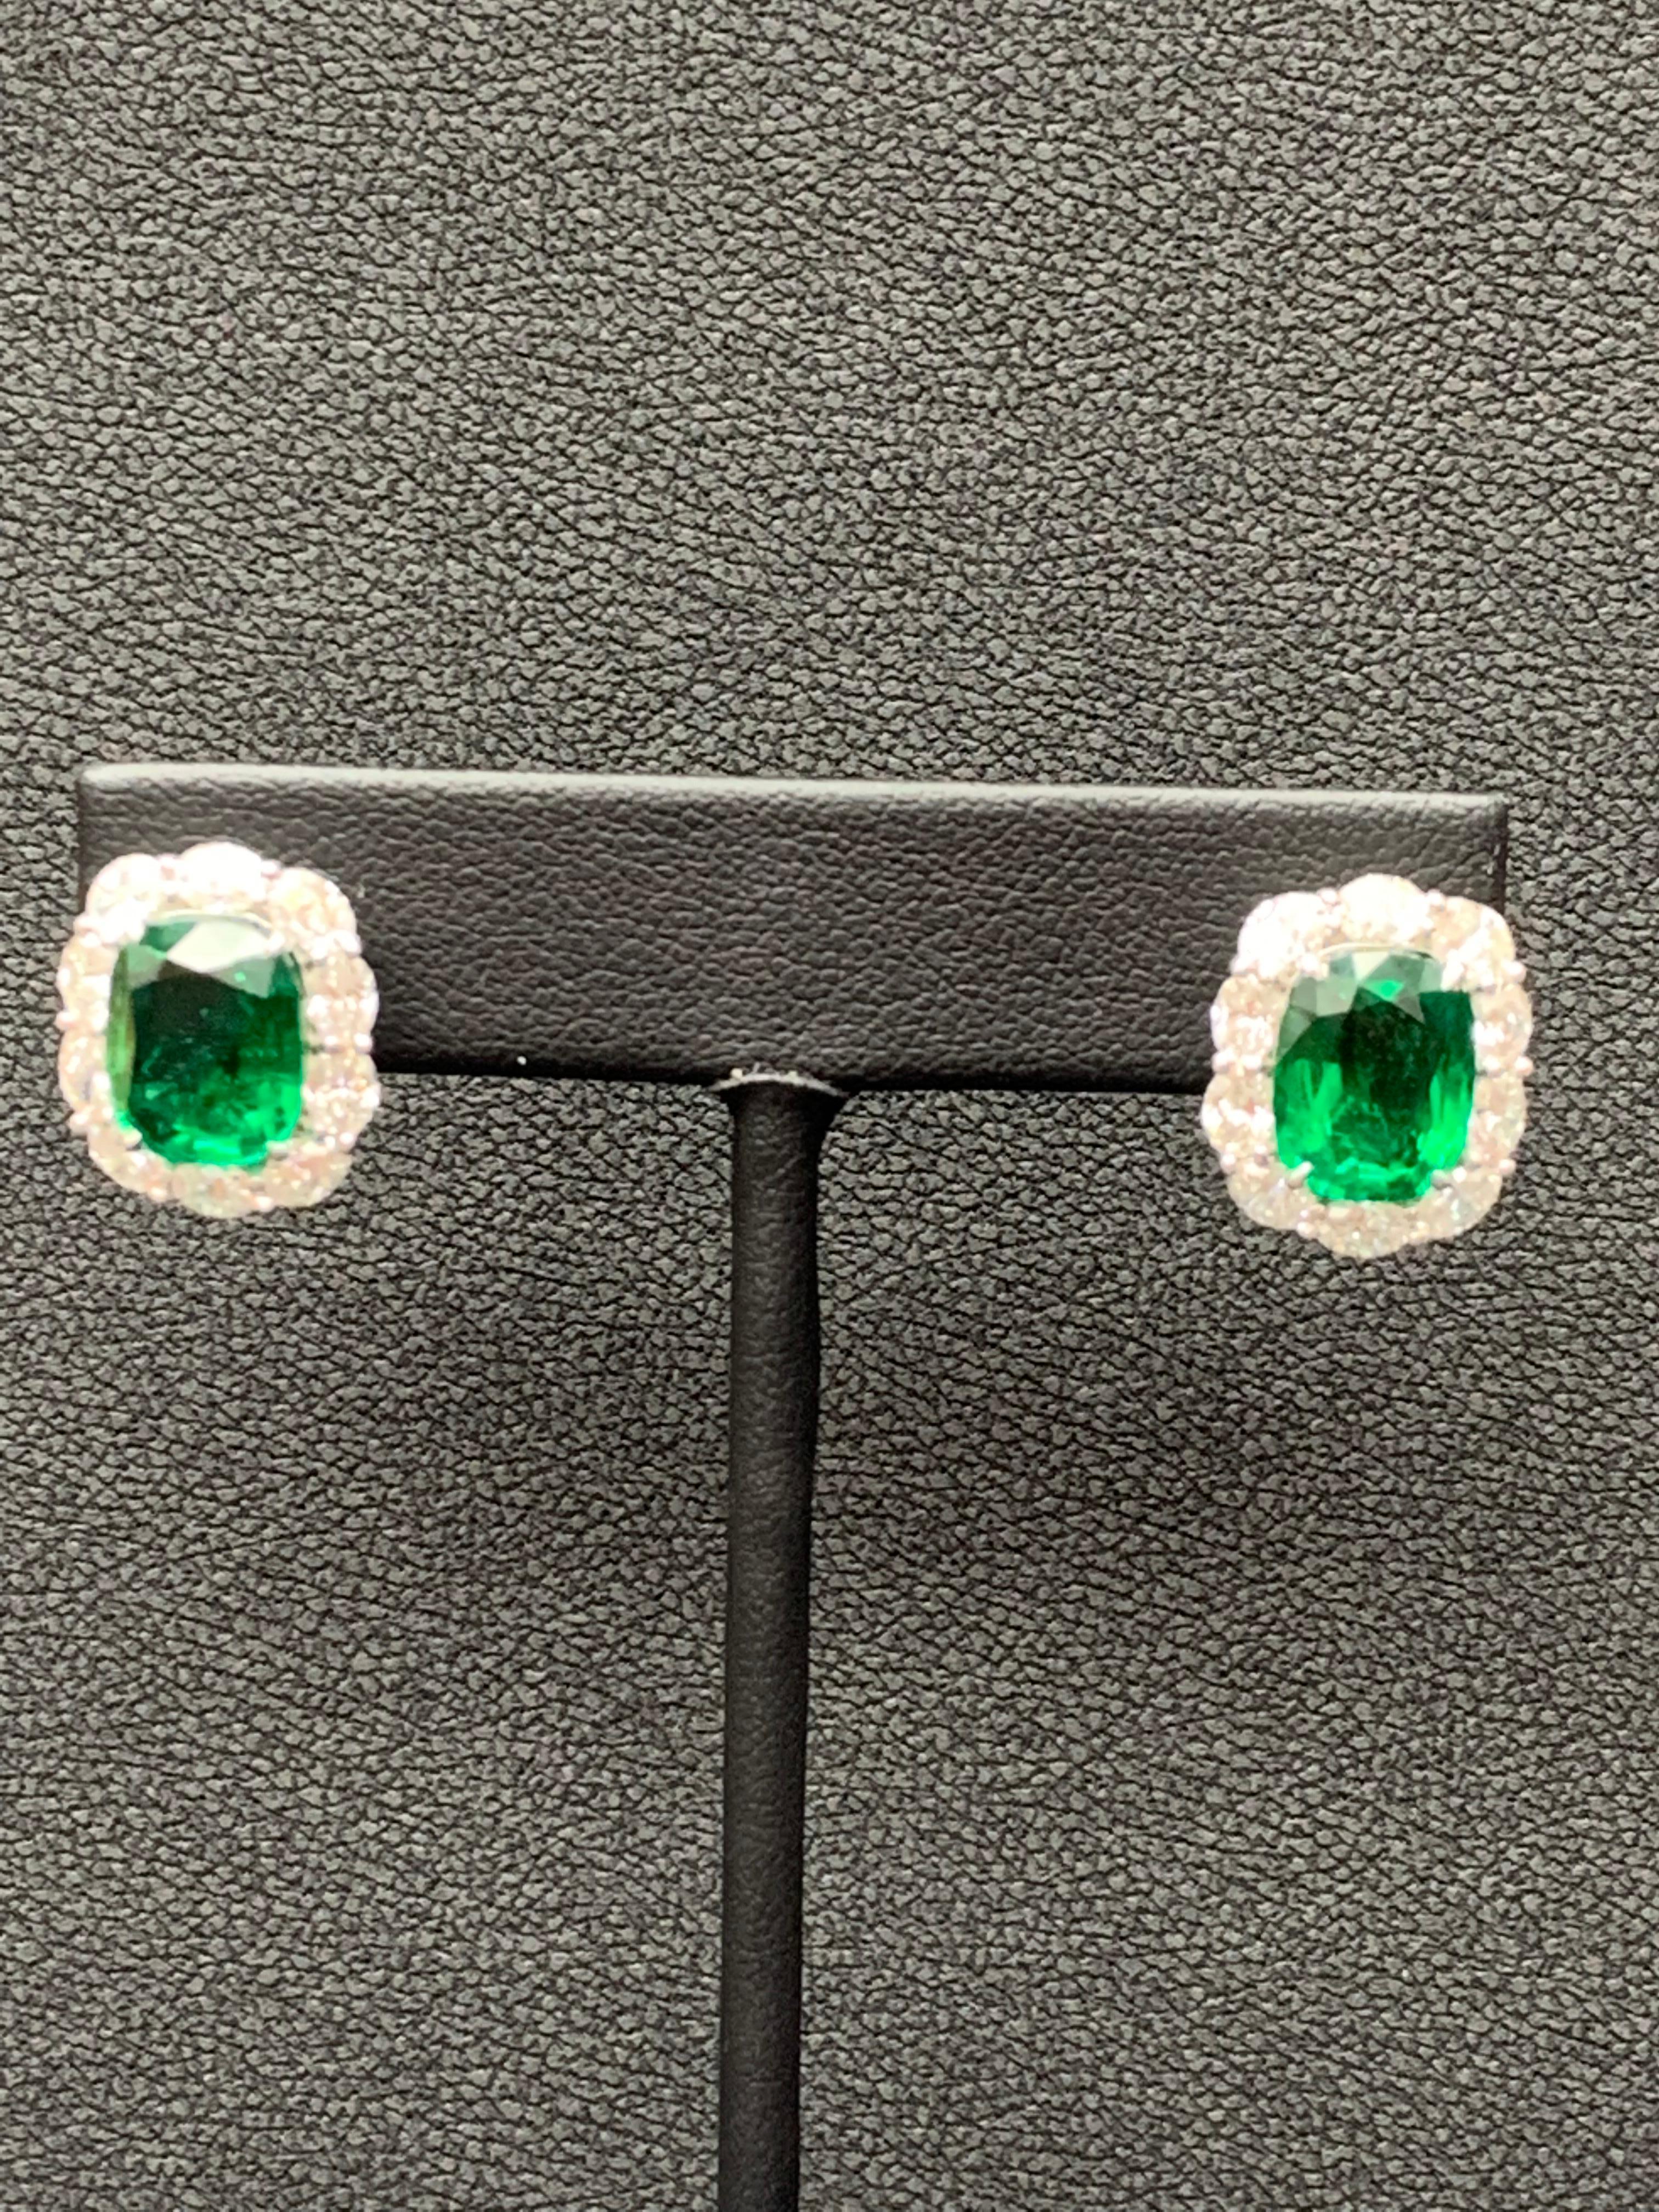 Modern 7.77 Carat Cushion Cut Emerald and Diamond Halo Earring in 18K White Gold For Sale